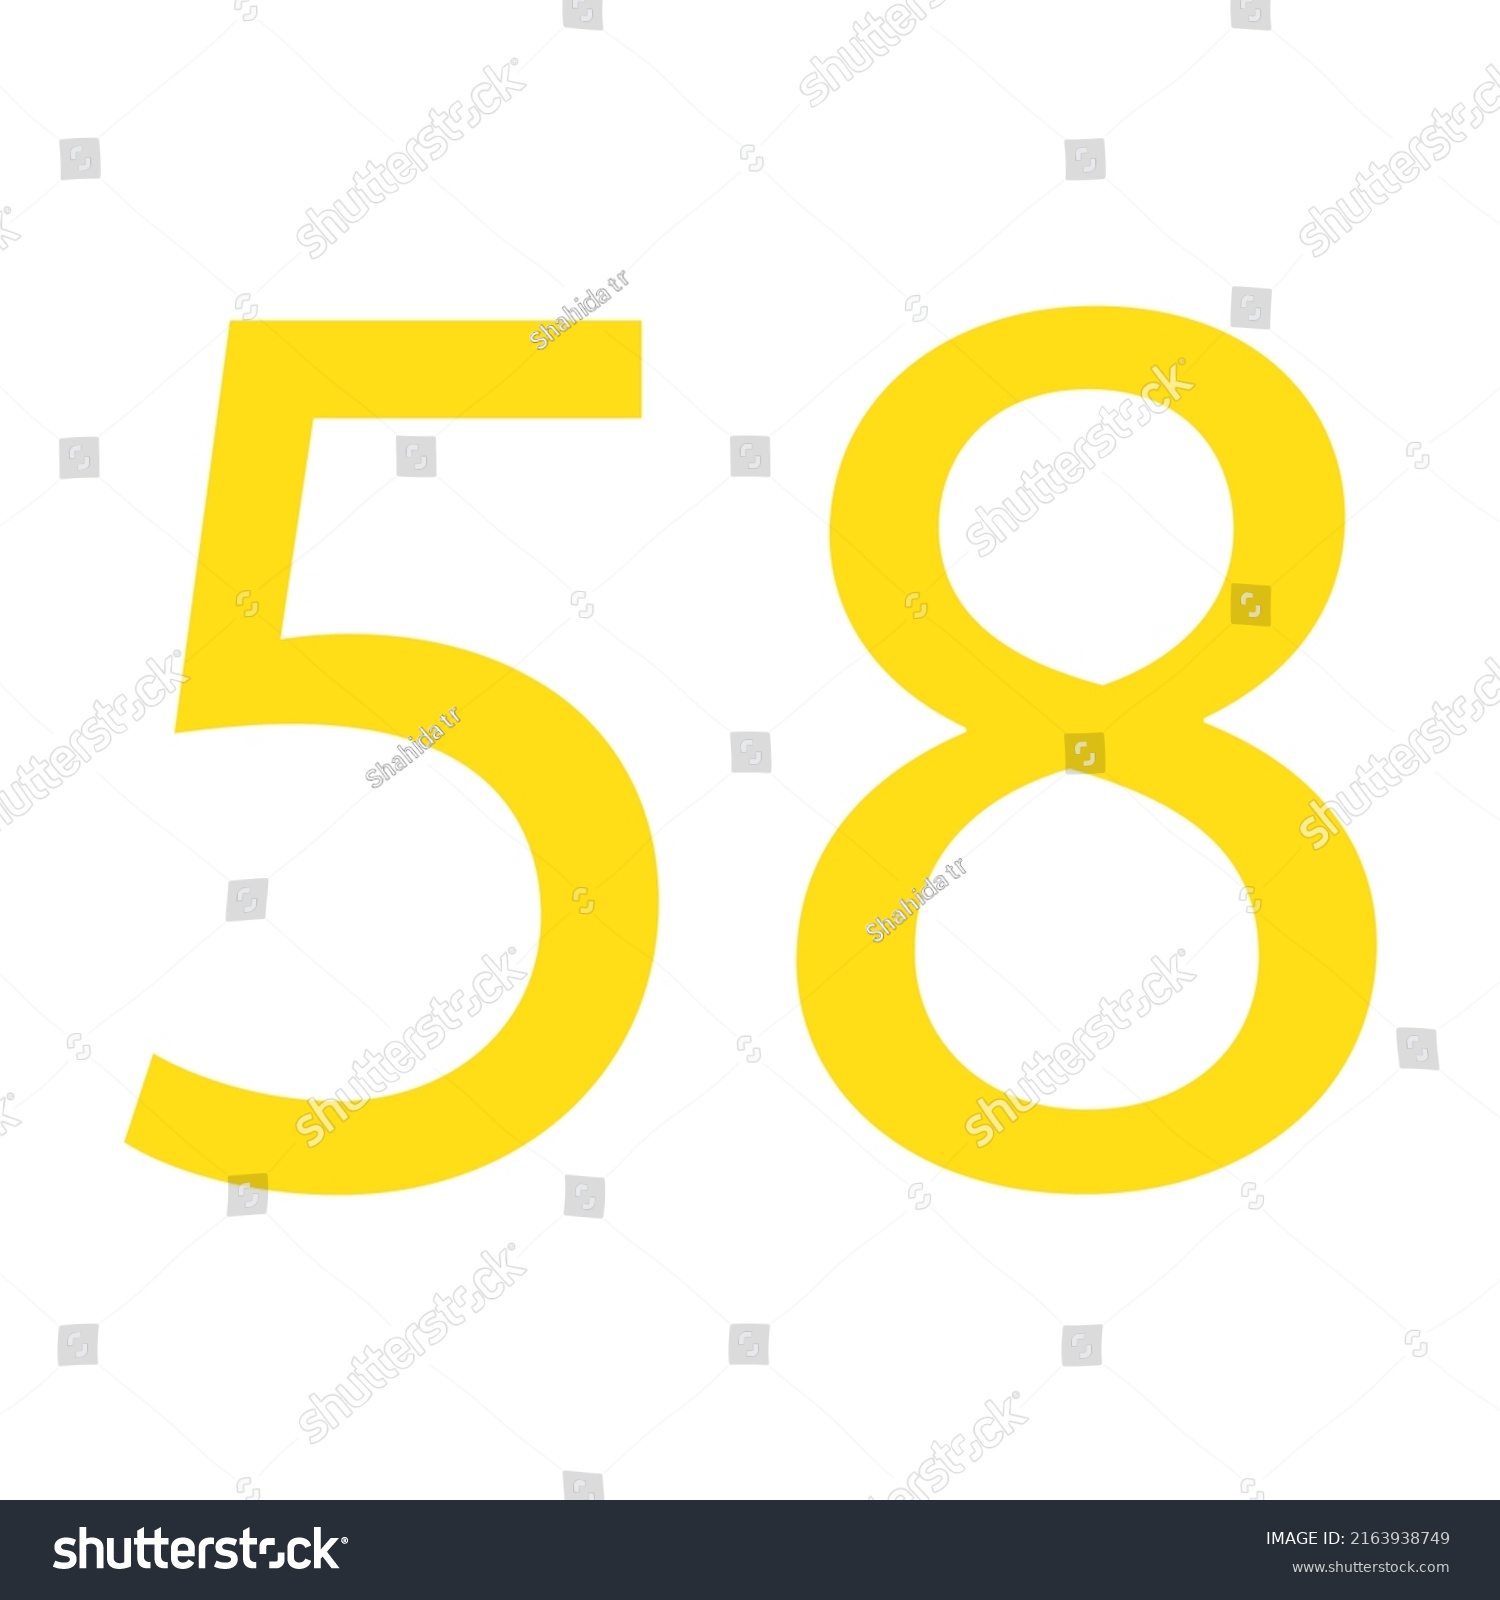 58 Number Simple Clip Art Vector Stock Vector Royalty Free 2163938749